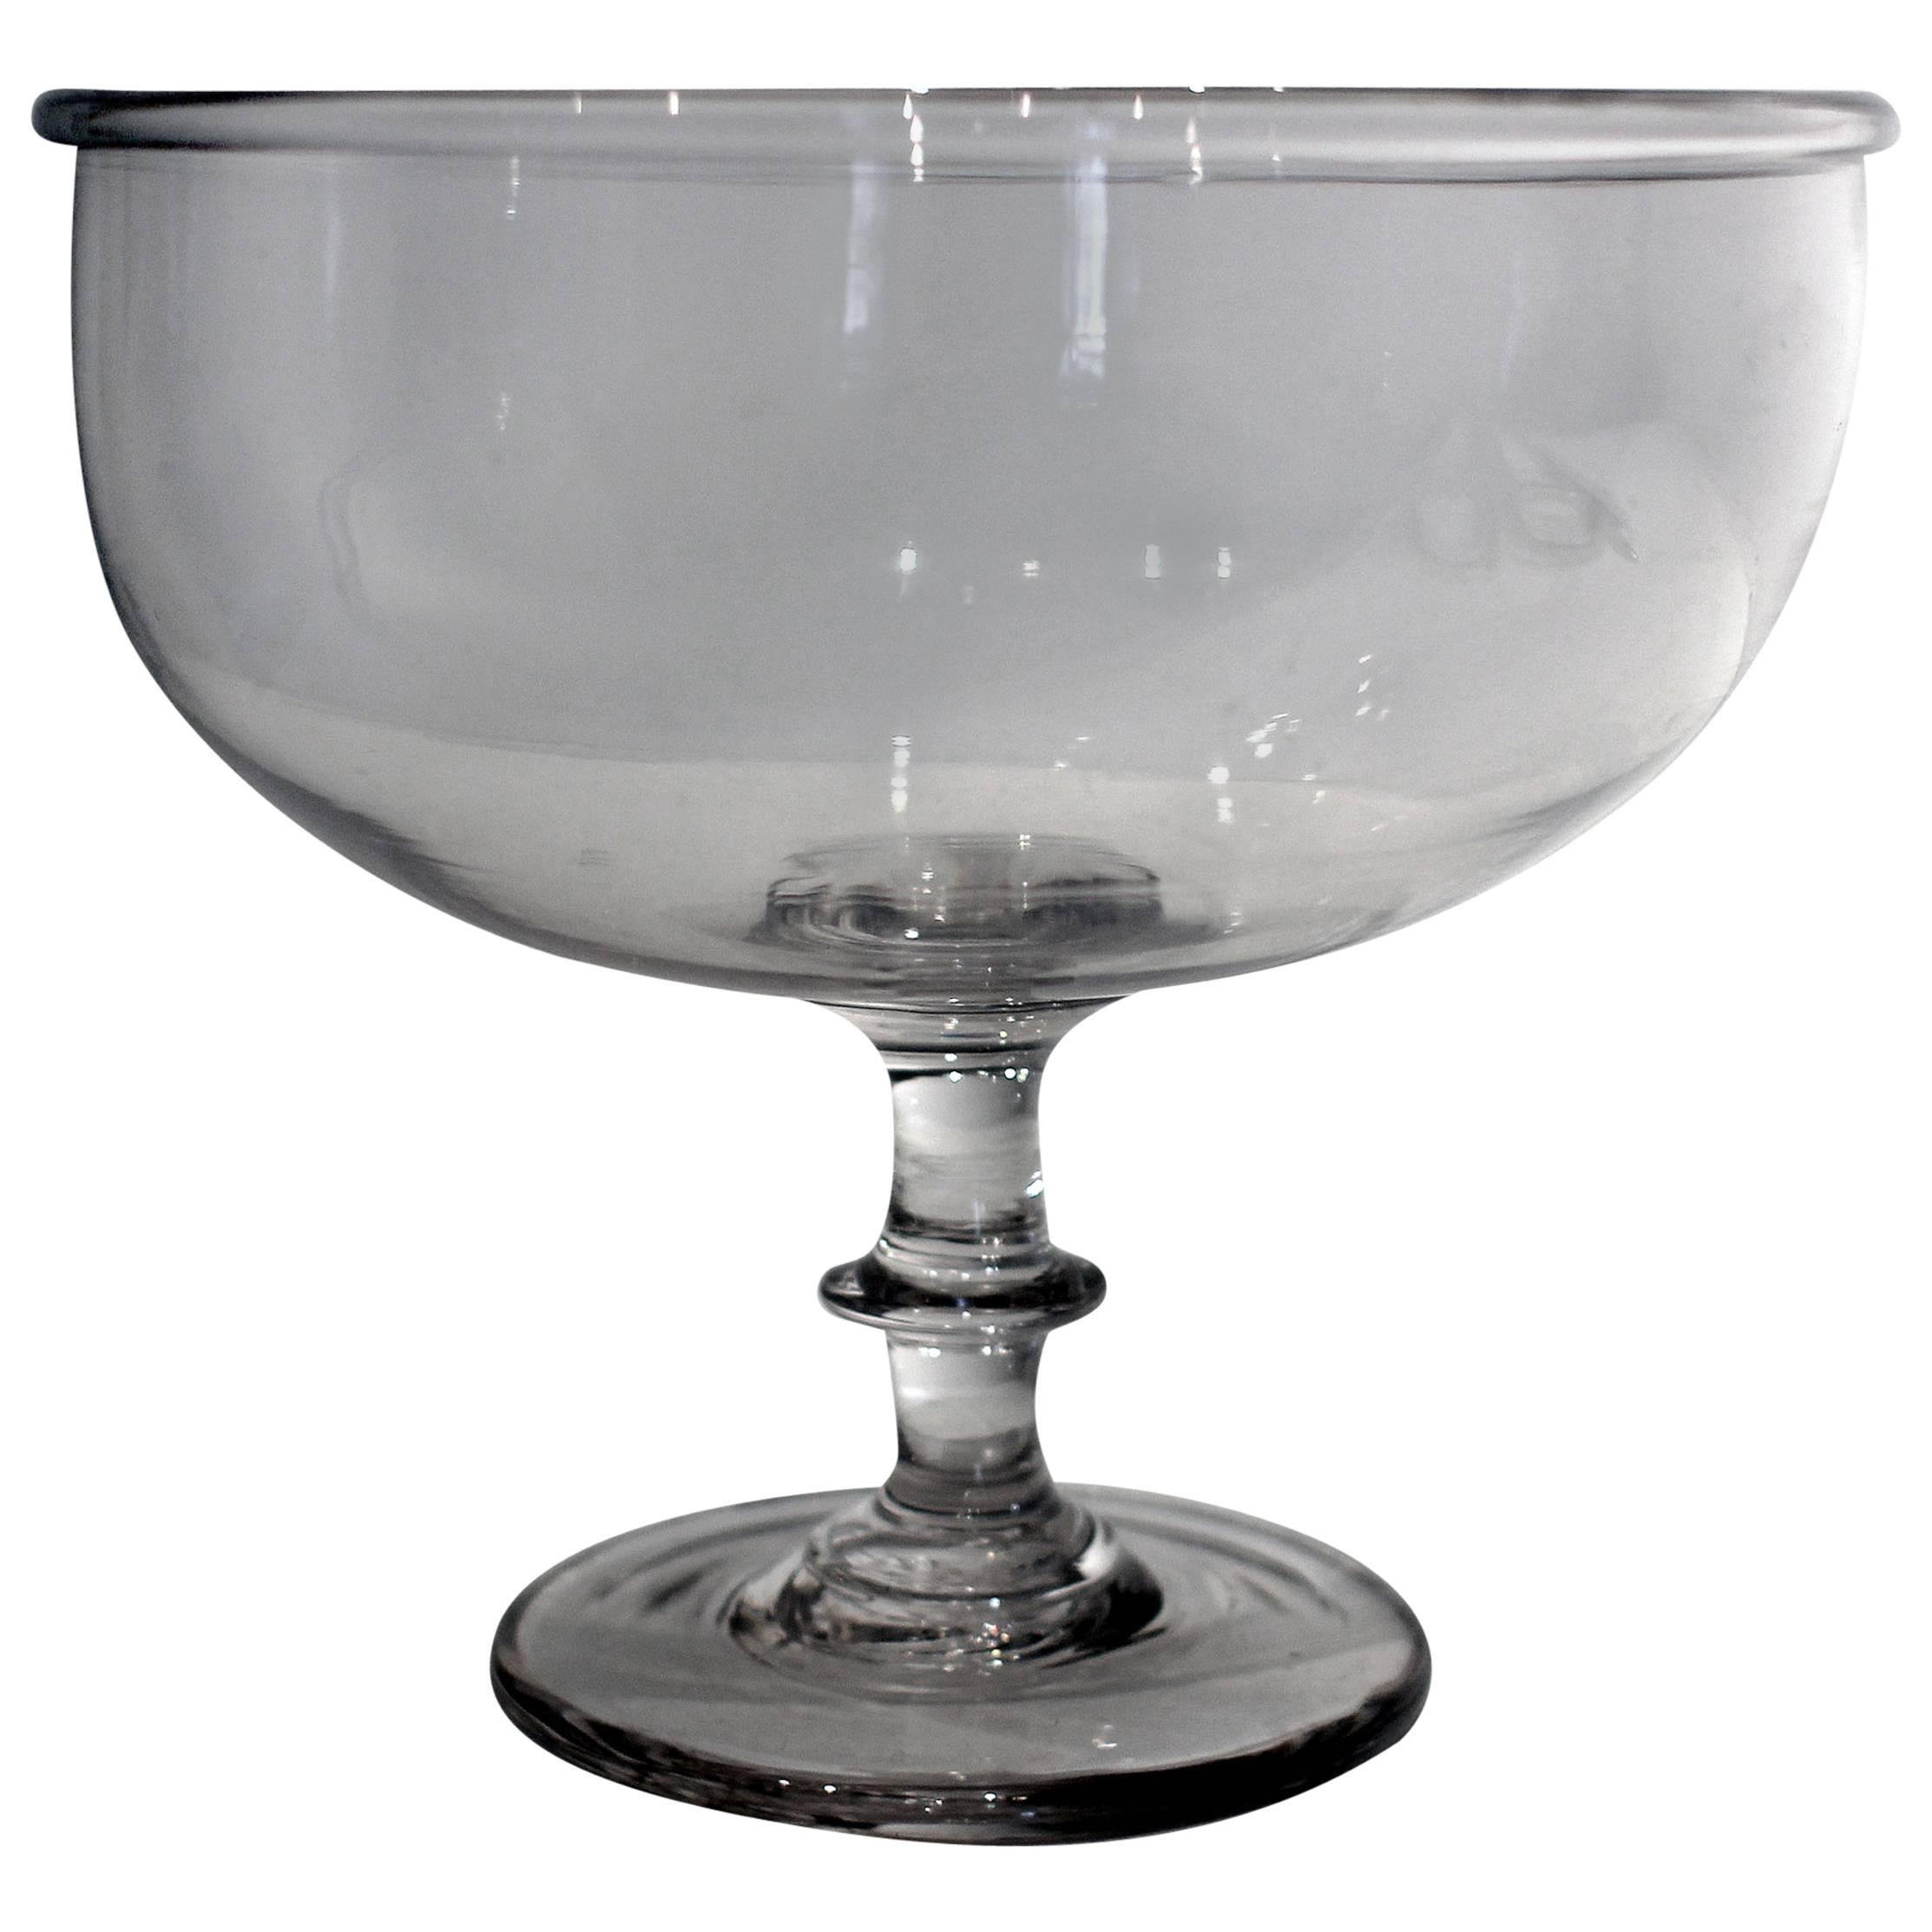 New England Blown Glass Compote, Early 19th Century